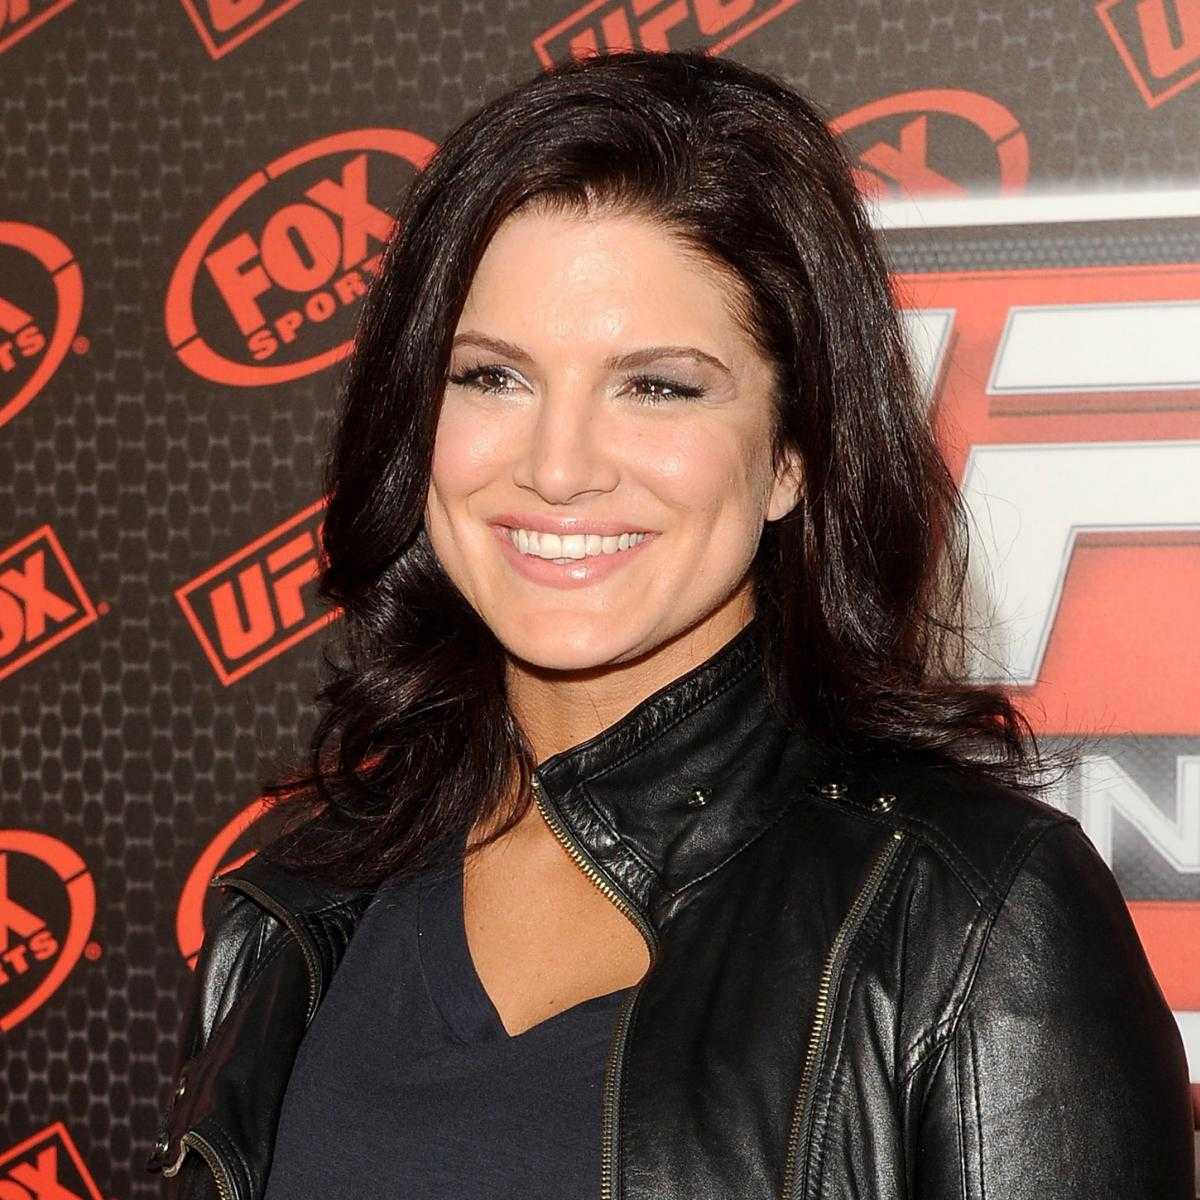 70+ Hottest Pictures Of Gina Carano Who Plays Angel Dust In Deadpool Movies 10